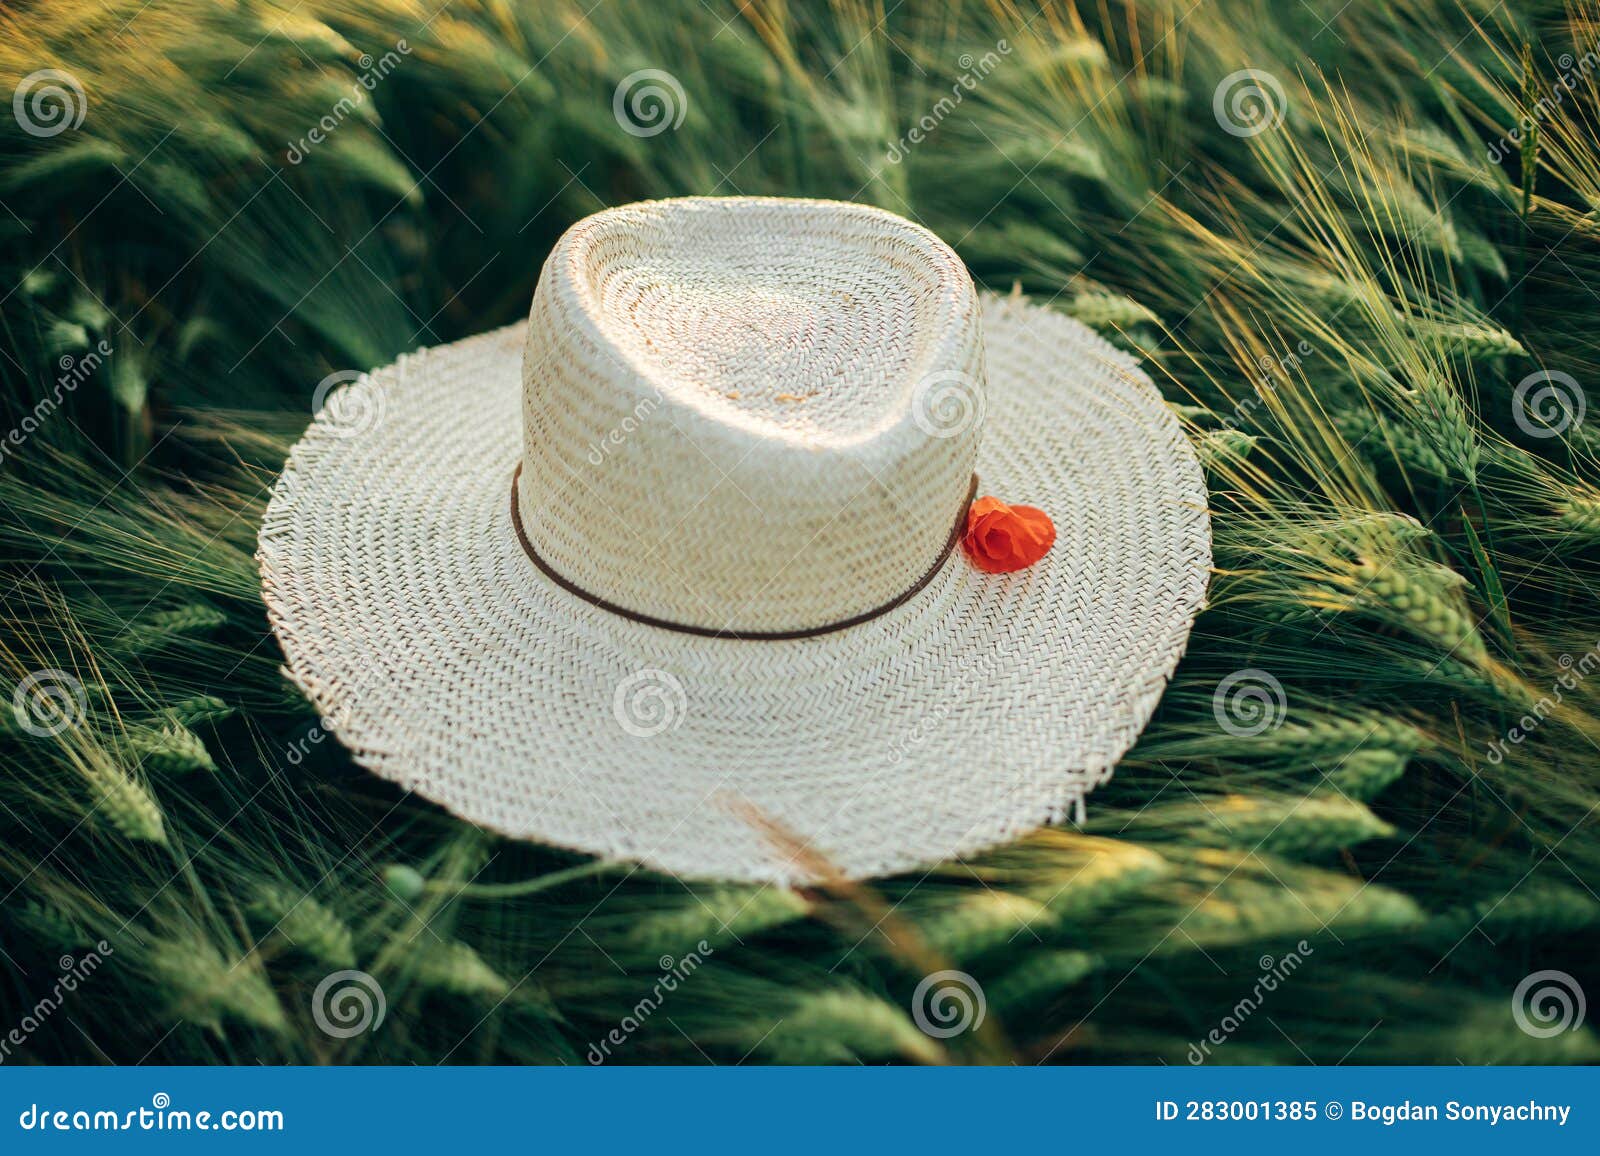 Rustic Straw Hat and Red Poppy on Barley Ears in Evening Field Close Up ...